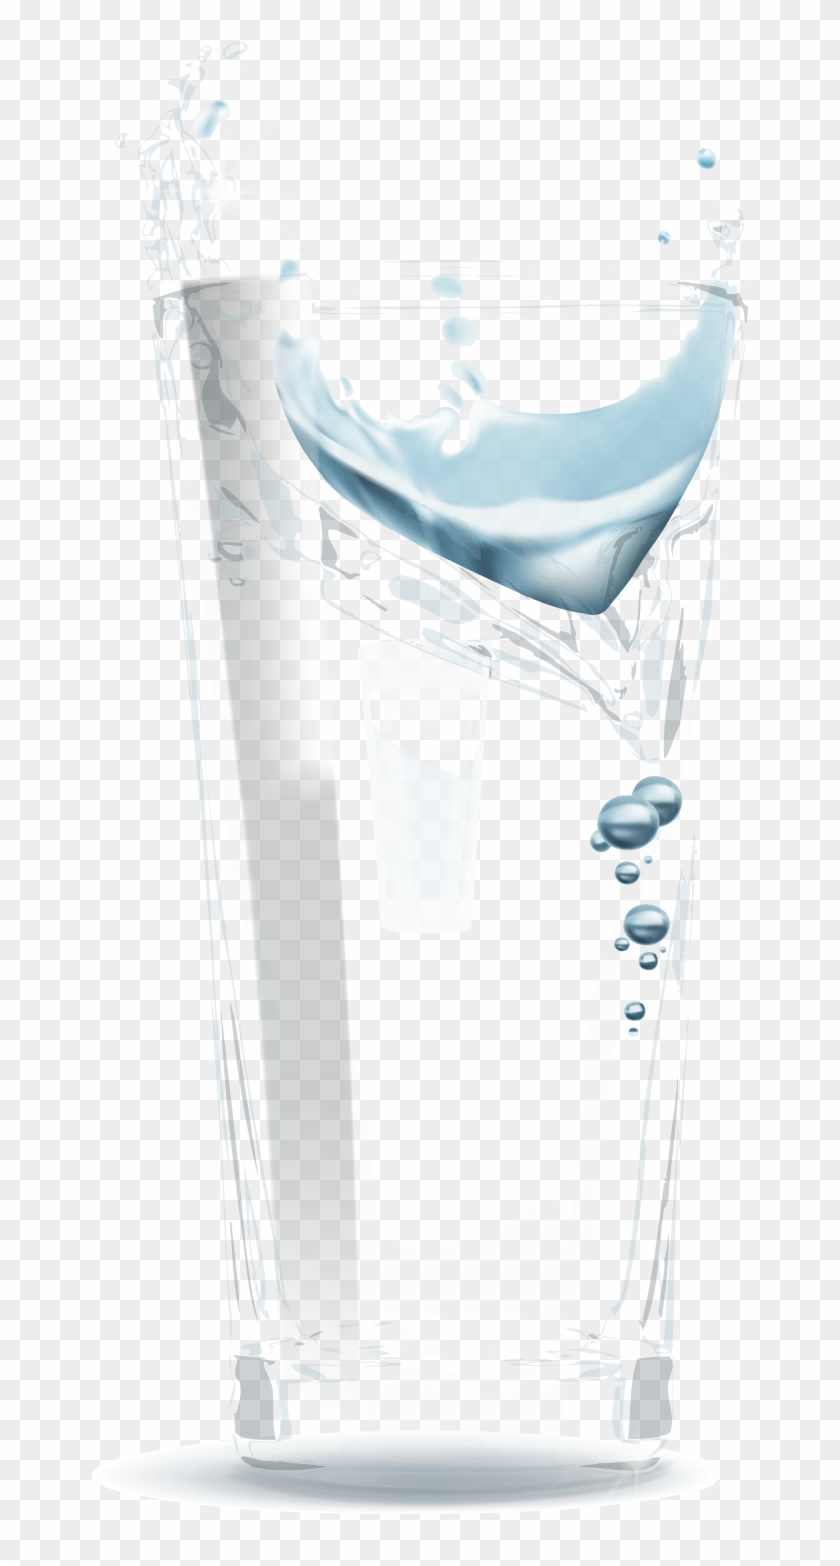 Vector Glass Cup 1 658*1500 Transprent Png Free Download - Vector Glass Cup 1 658*1500 Transprent Png Free Download #610273